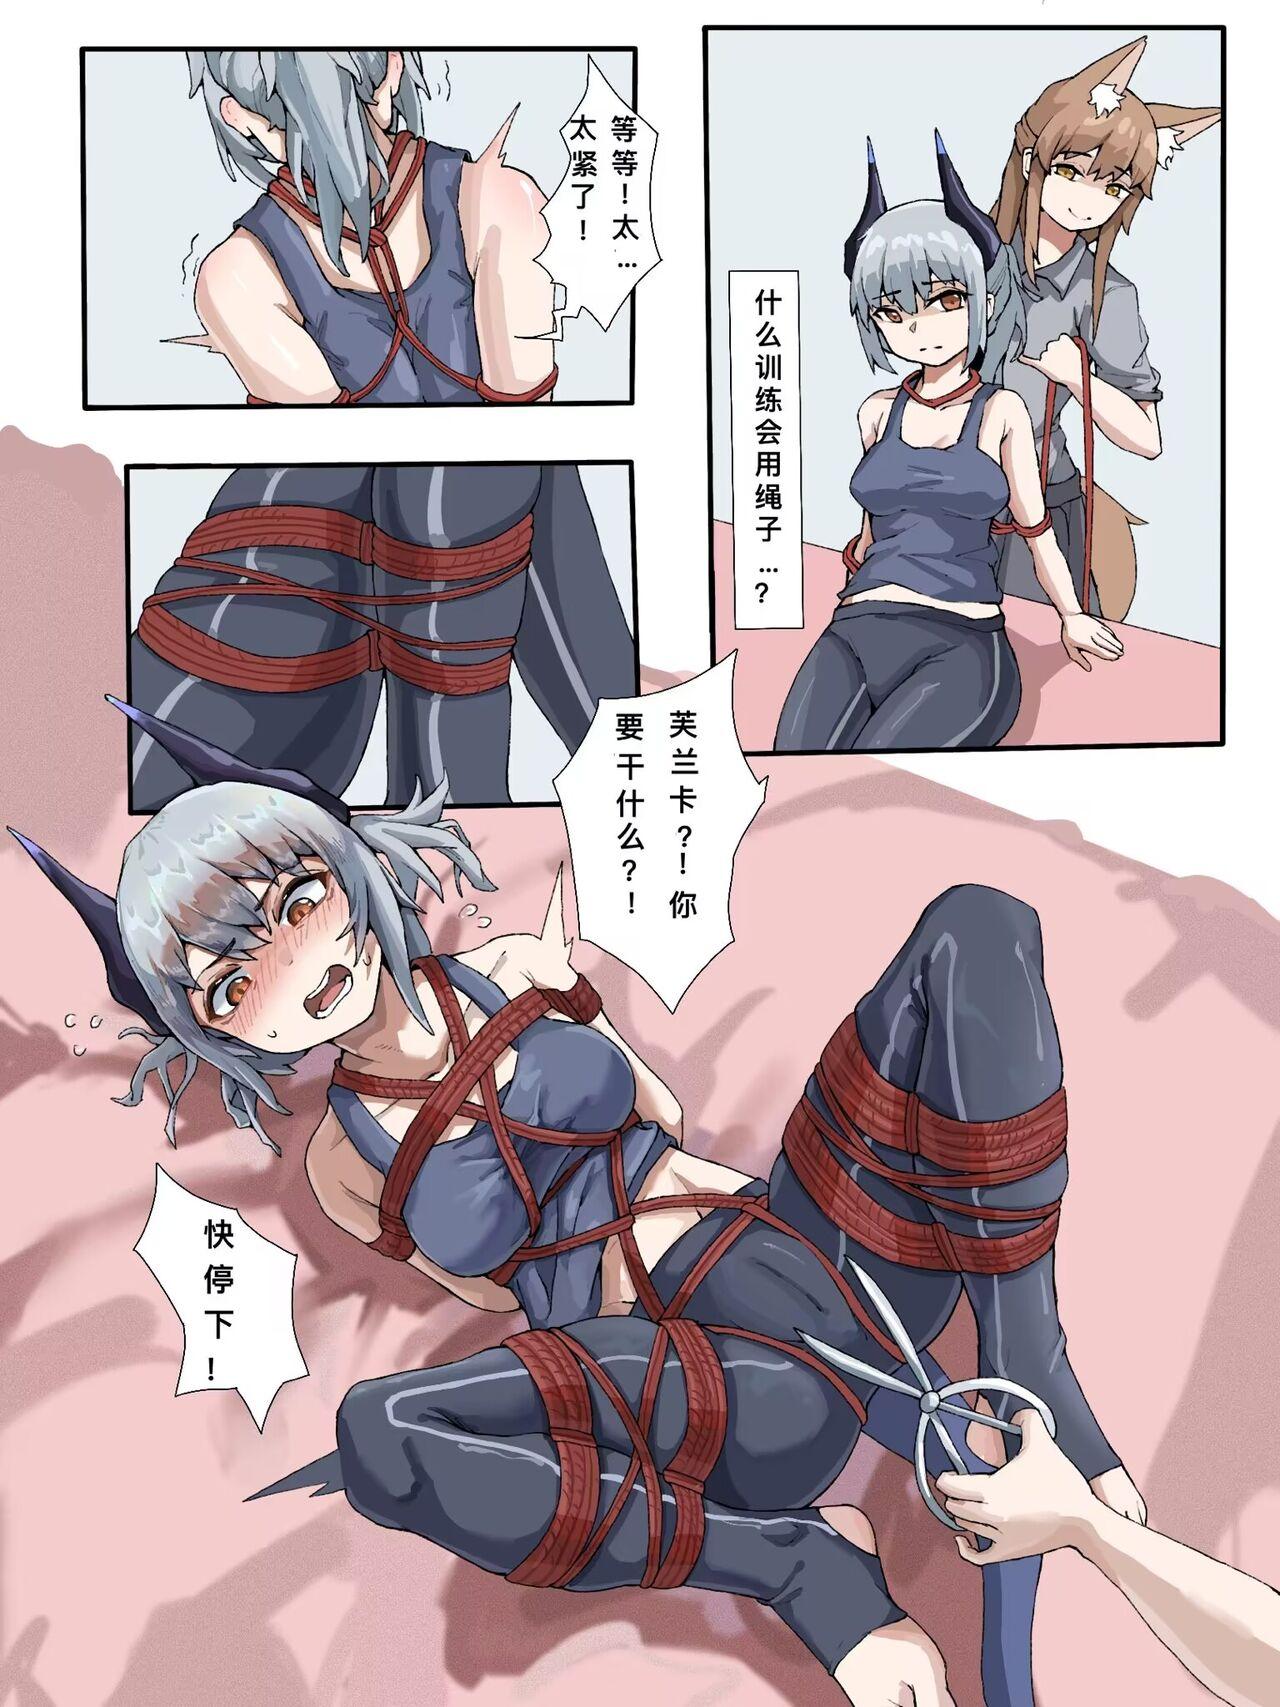 Unshaved 雷蛇和弗兰卡的紧缚逃脱练习（迫真） - Arknights Sologirl - Page 2